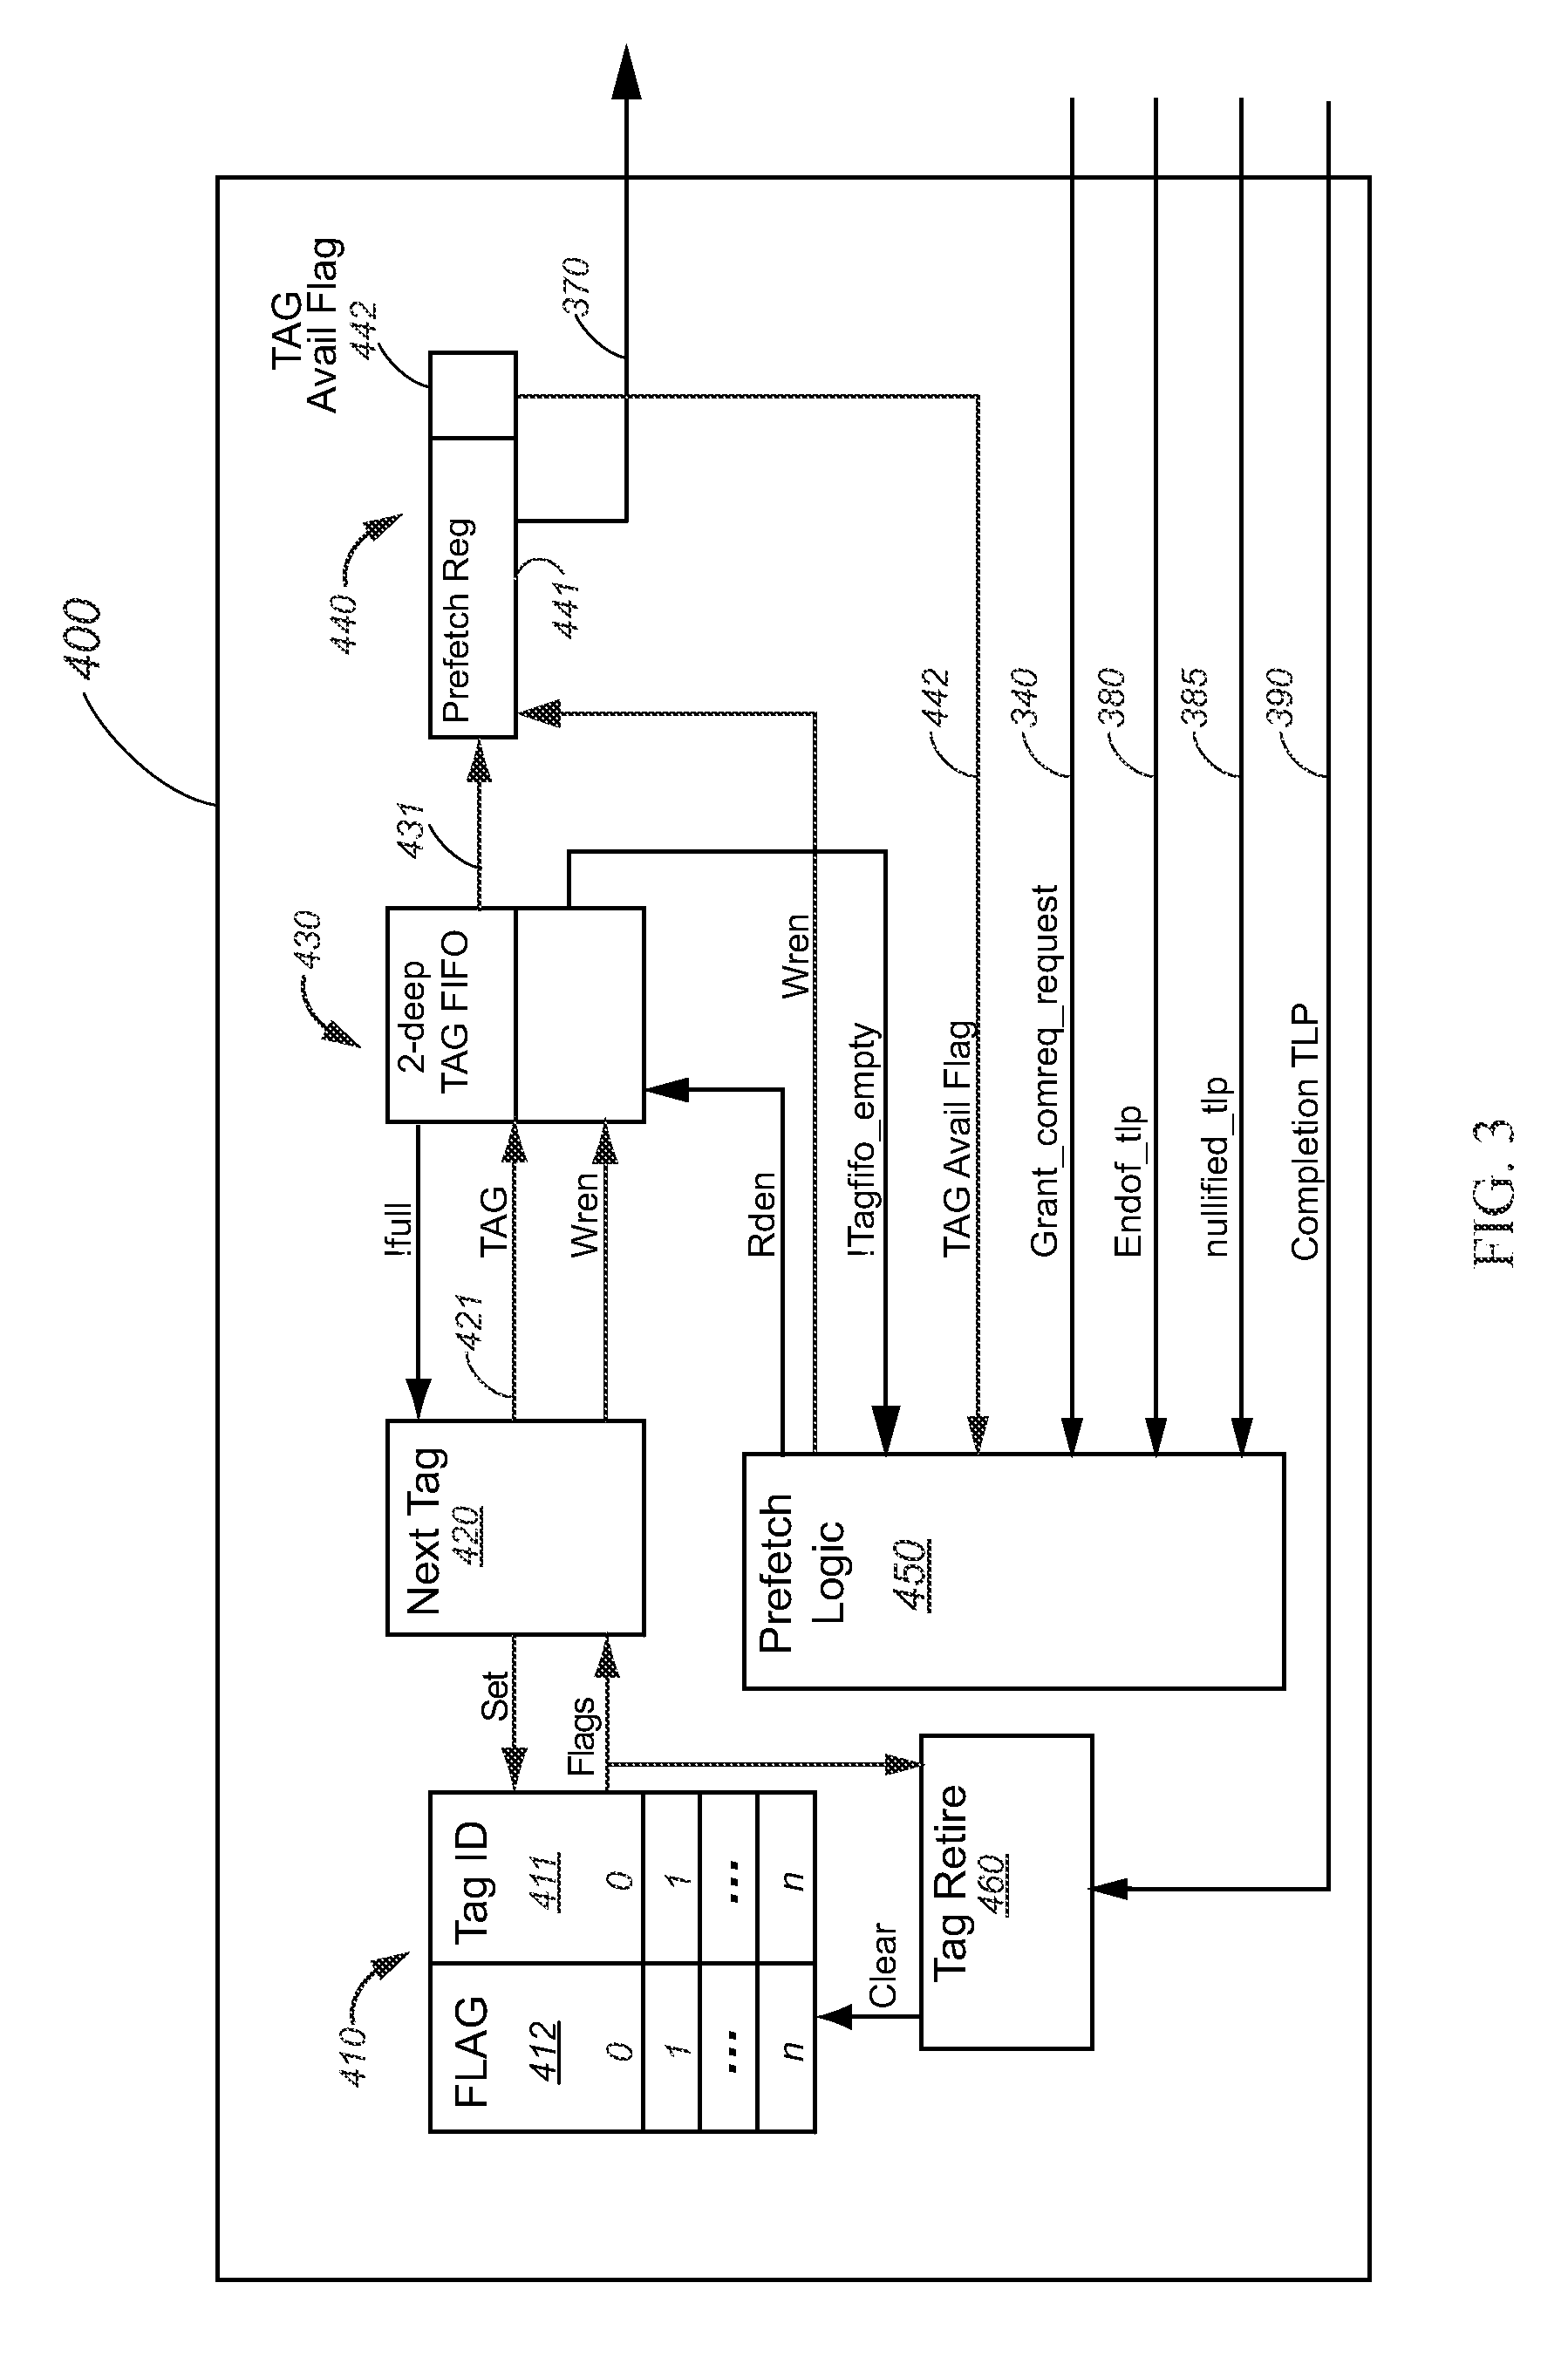 Method and apparatus for generating unique identification numbers for PCI express transactions with substantially increased performance